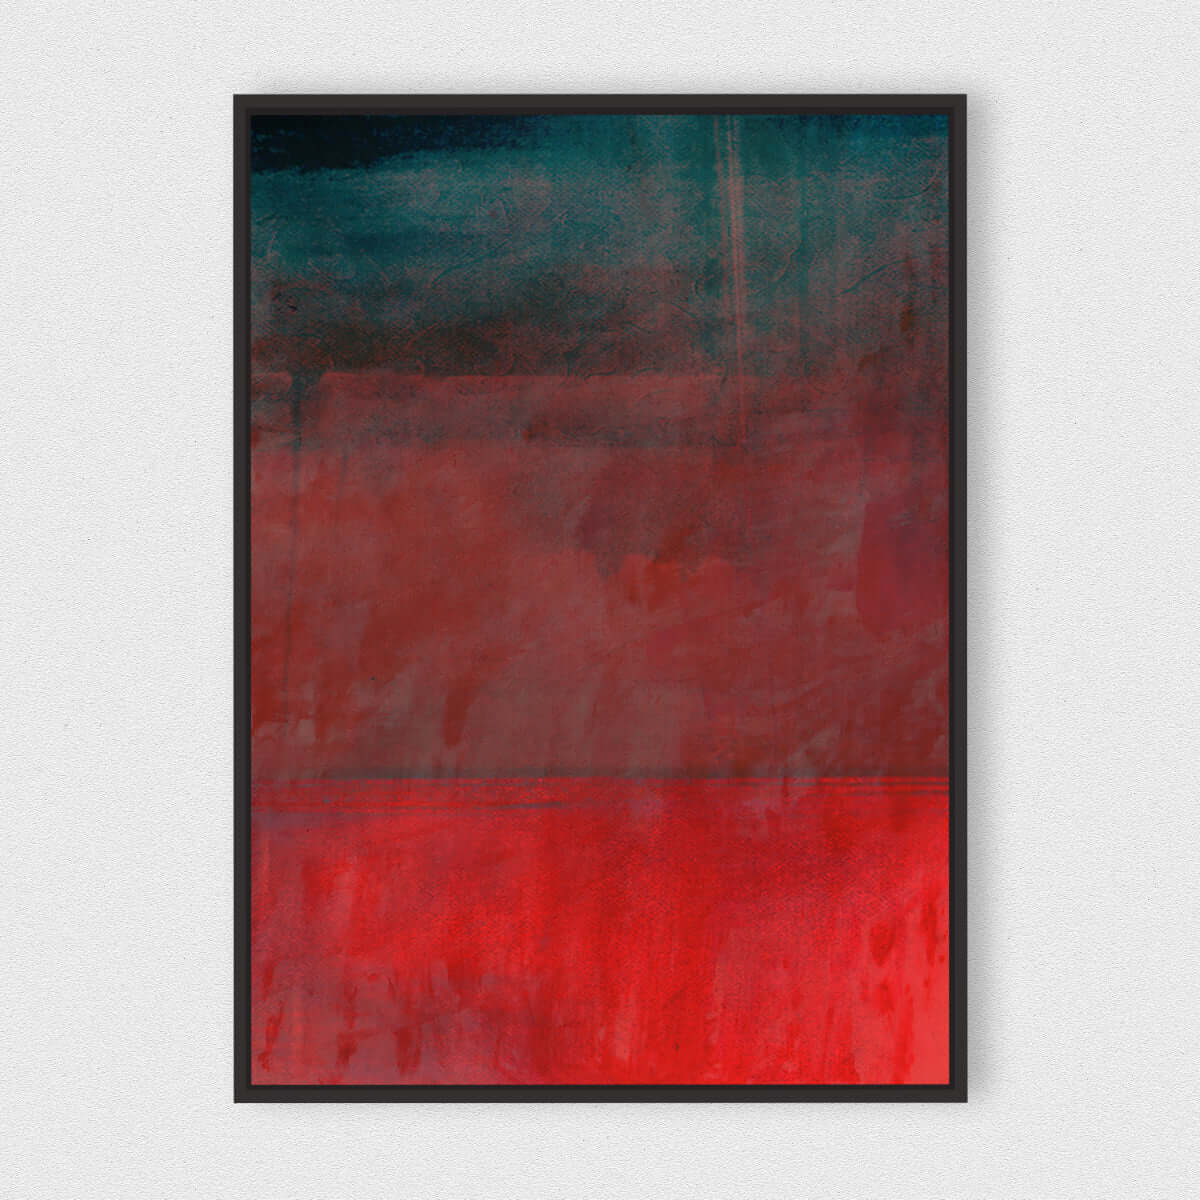 Fading into Red framed horizontal canvas wall art piece for sale at Vybe Interior